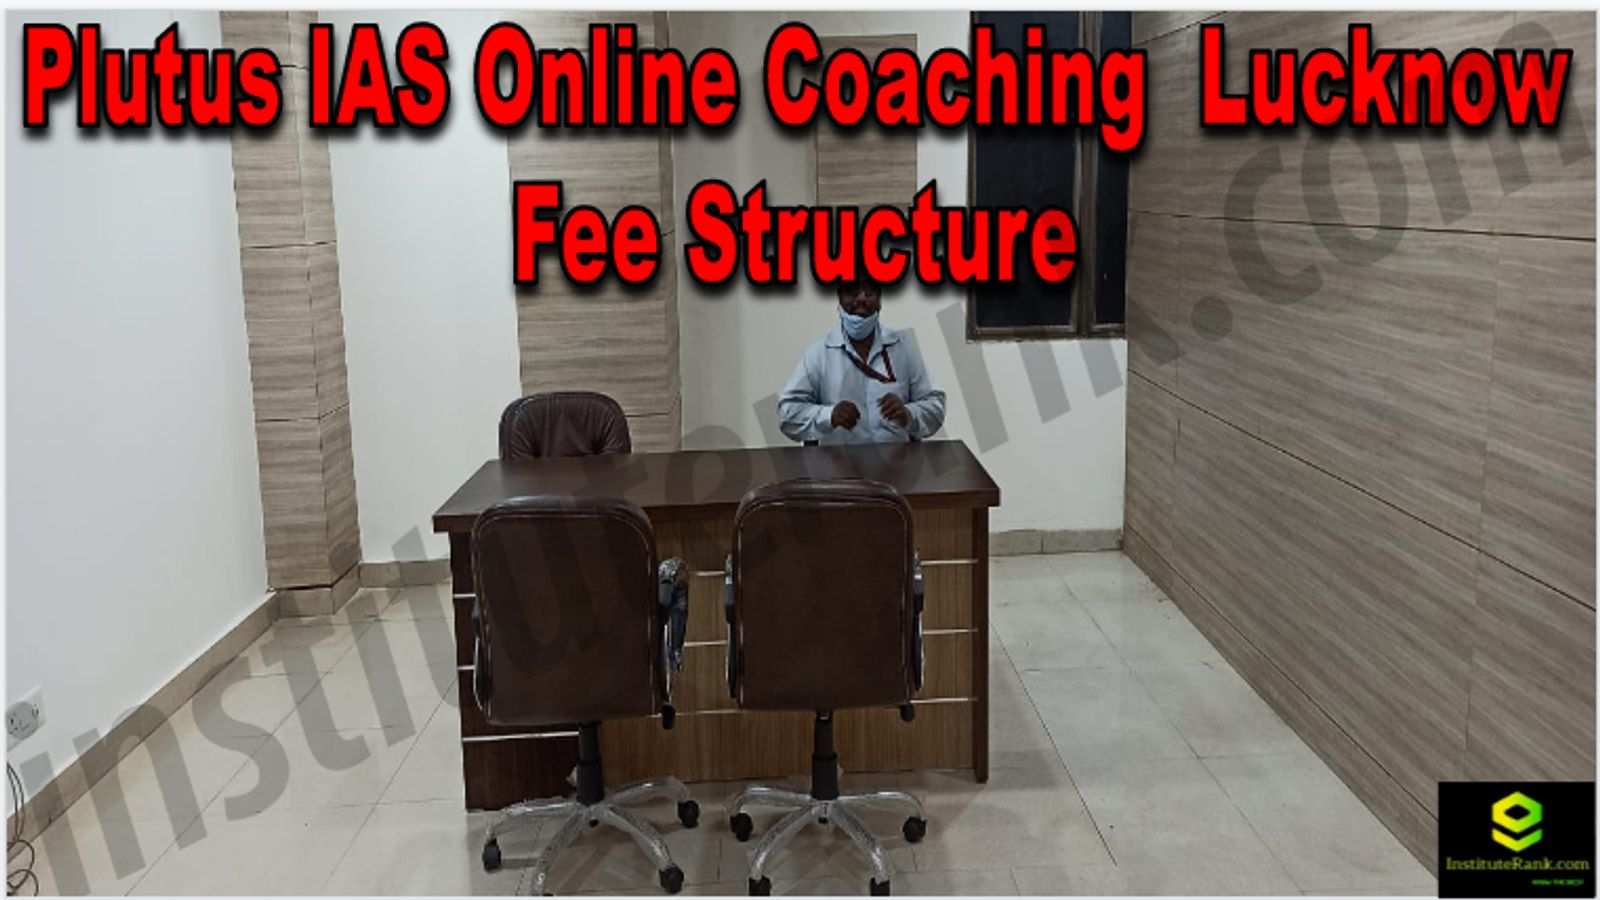 Plutus IAS Online Coaching Lucknow Reviews Fee Structure